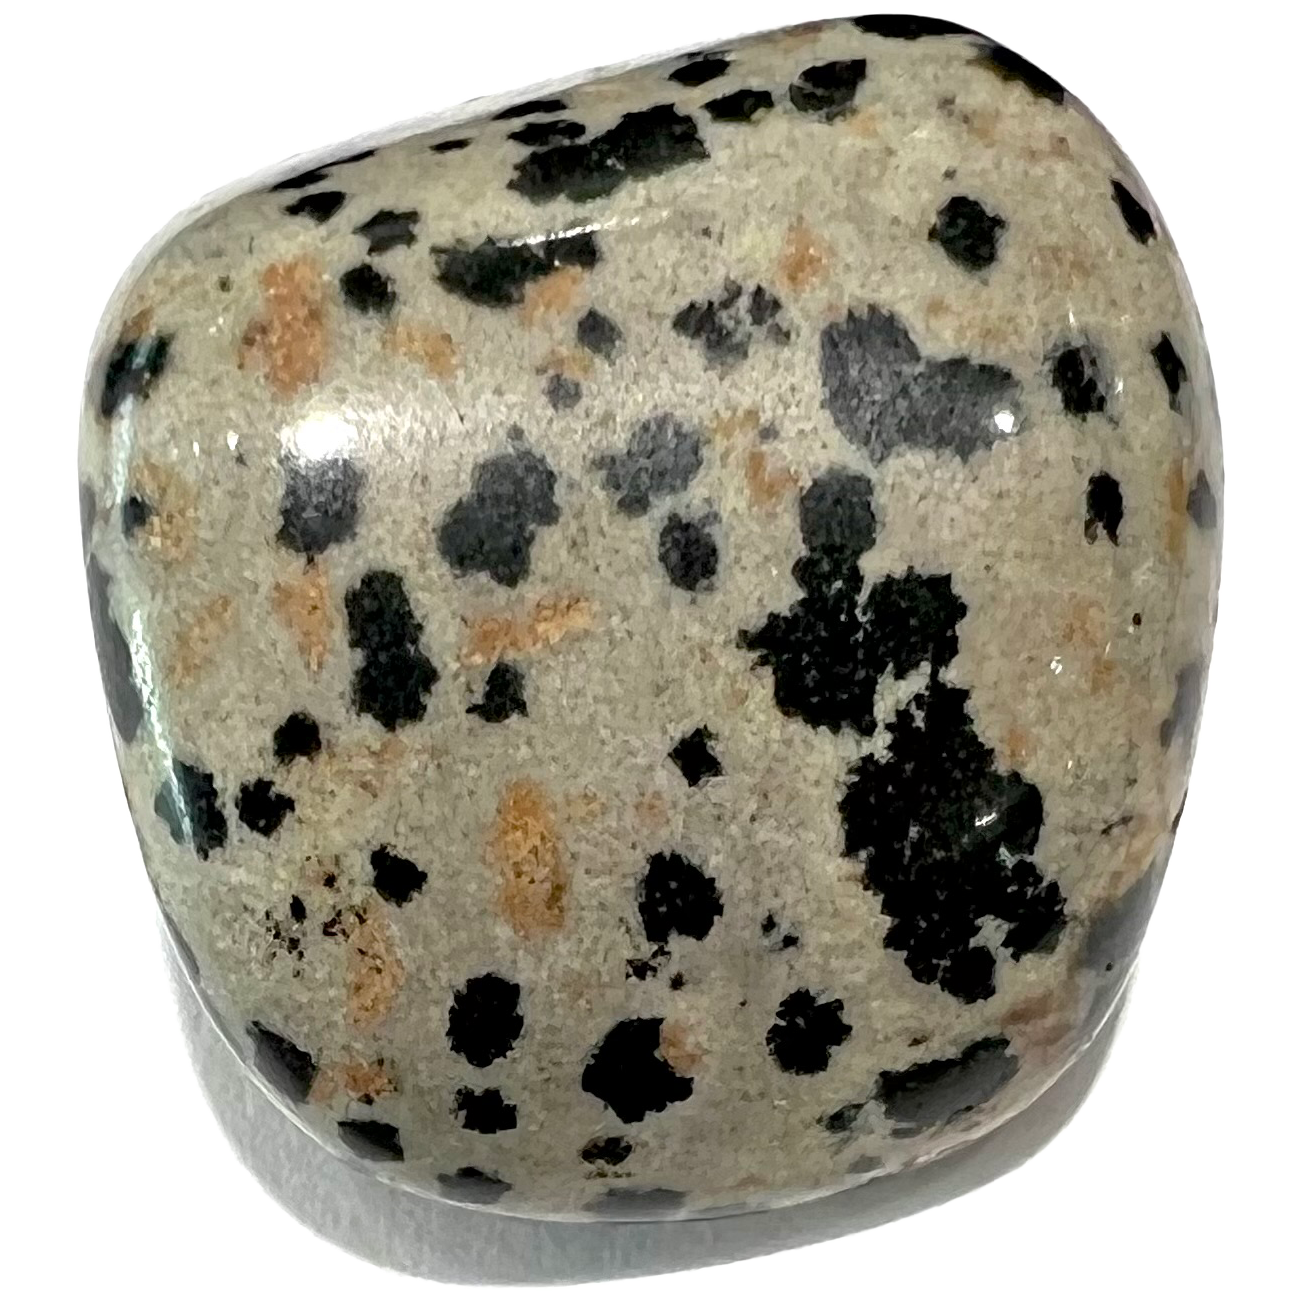 A tumble polished dalmatian stone.  The stone is yellowish white with yellow and black spotting.